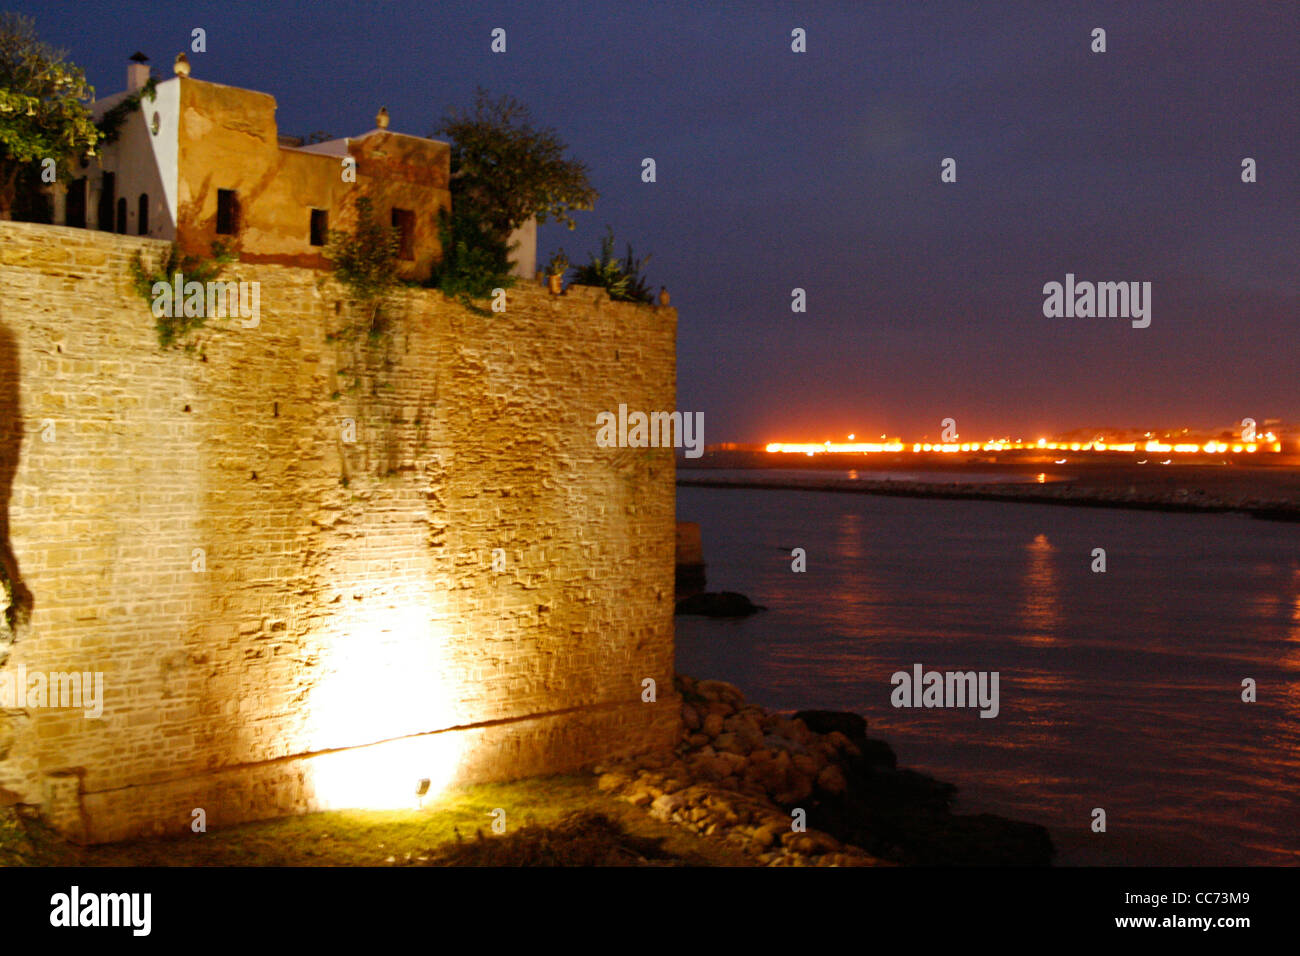 Night view of the "Kasbah des Oudaias". Rabat, Morocco. Stock Photo